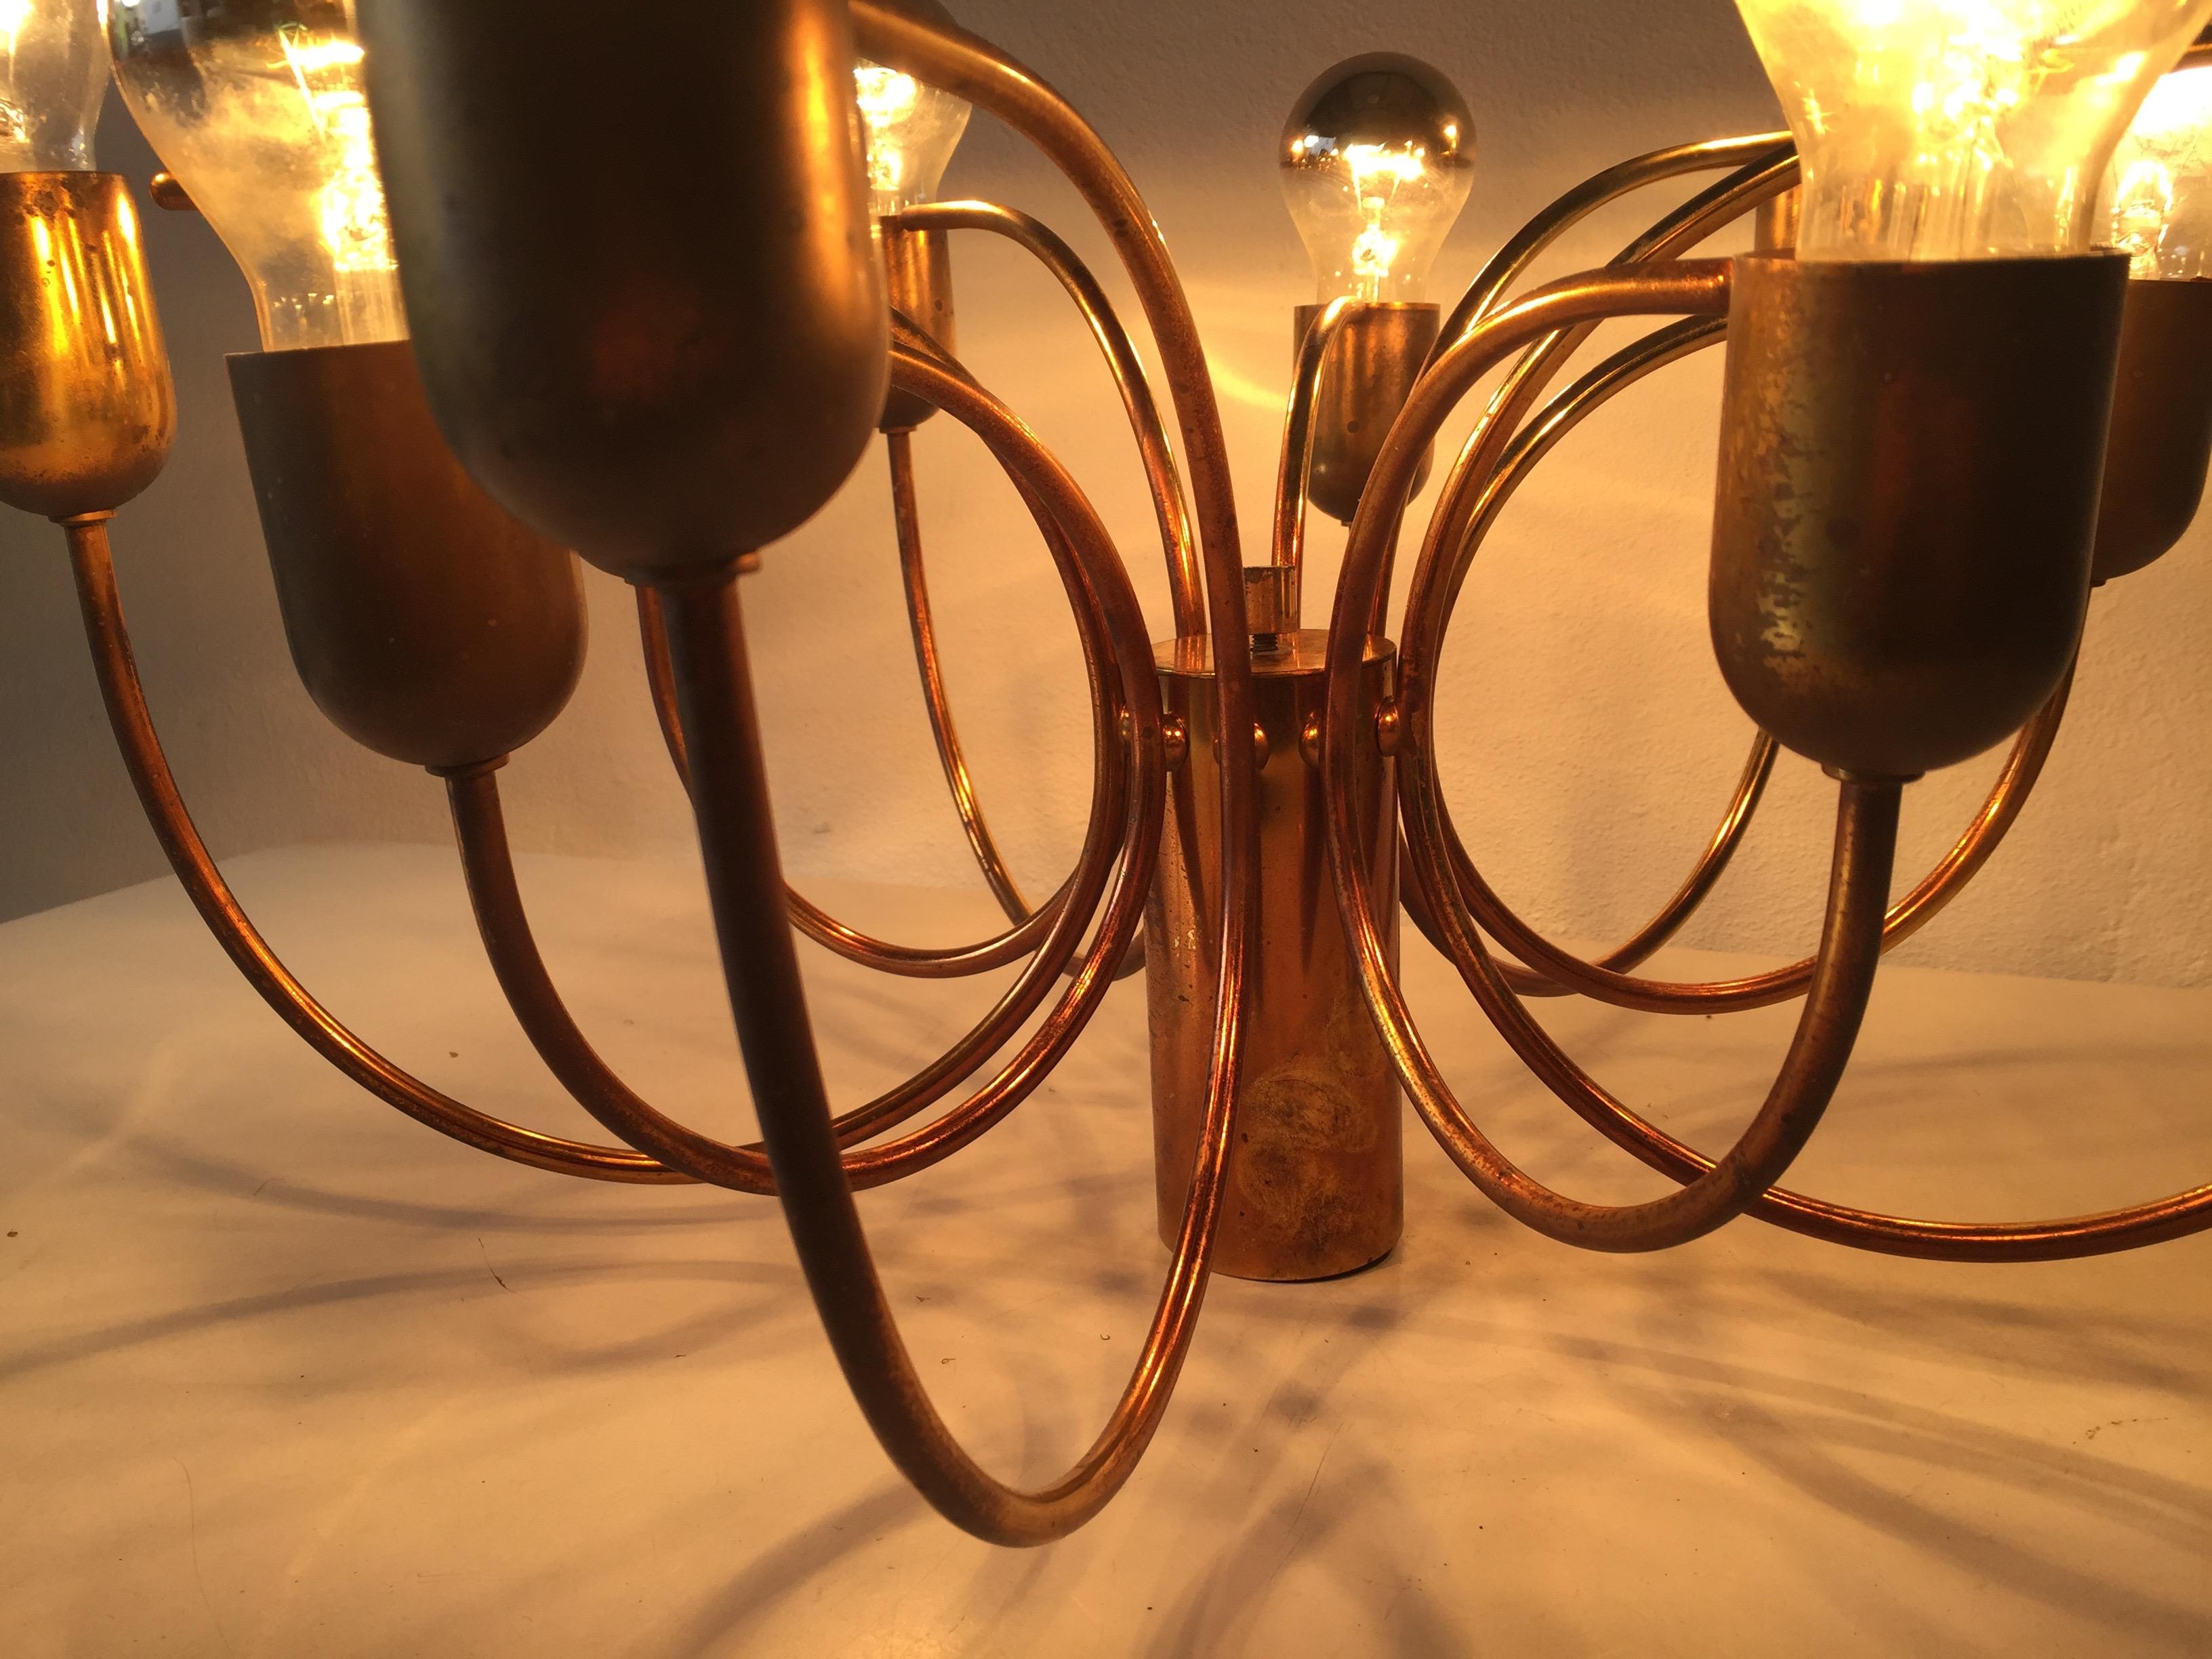 Rare 10 Arc Shaped Arms Full Brass Chandelier by Cosack Leuchten, 1970s Germany For Sale 13